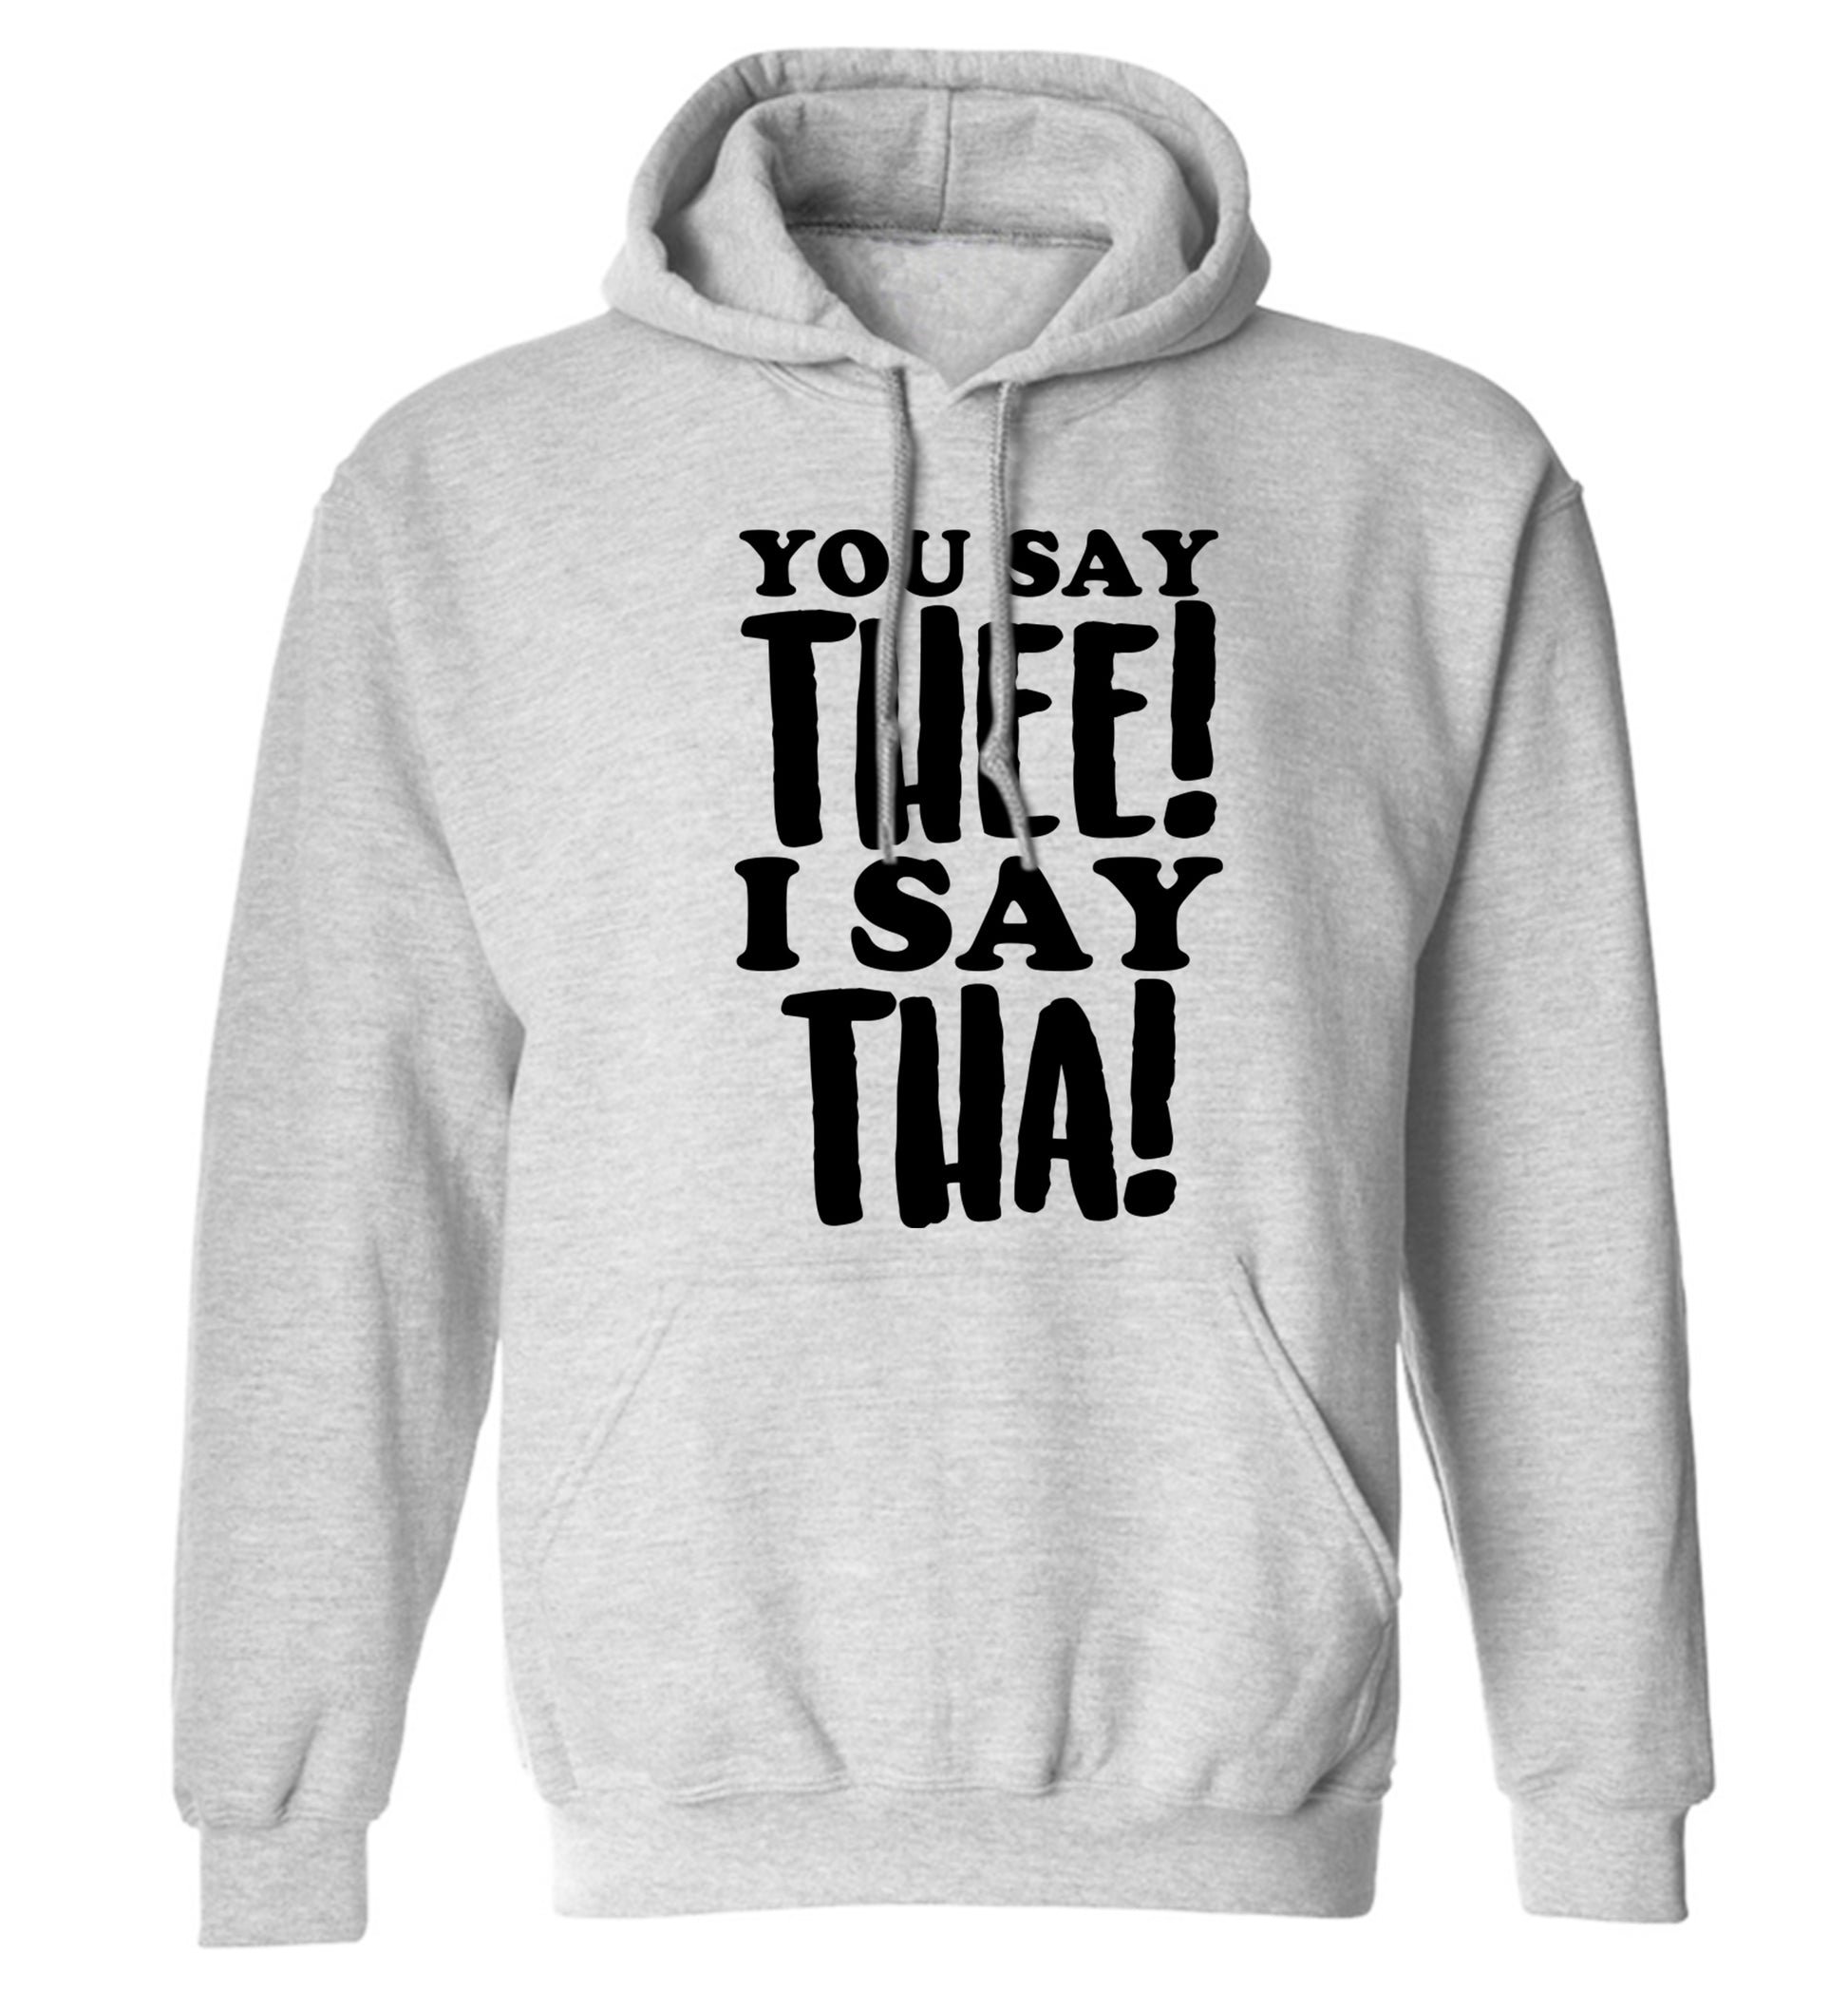 You say thee I say tha adults unisex grey hoodie 2XL